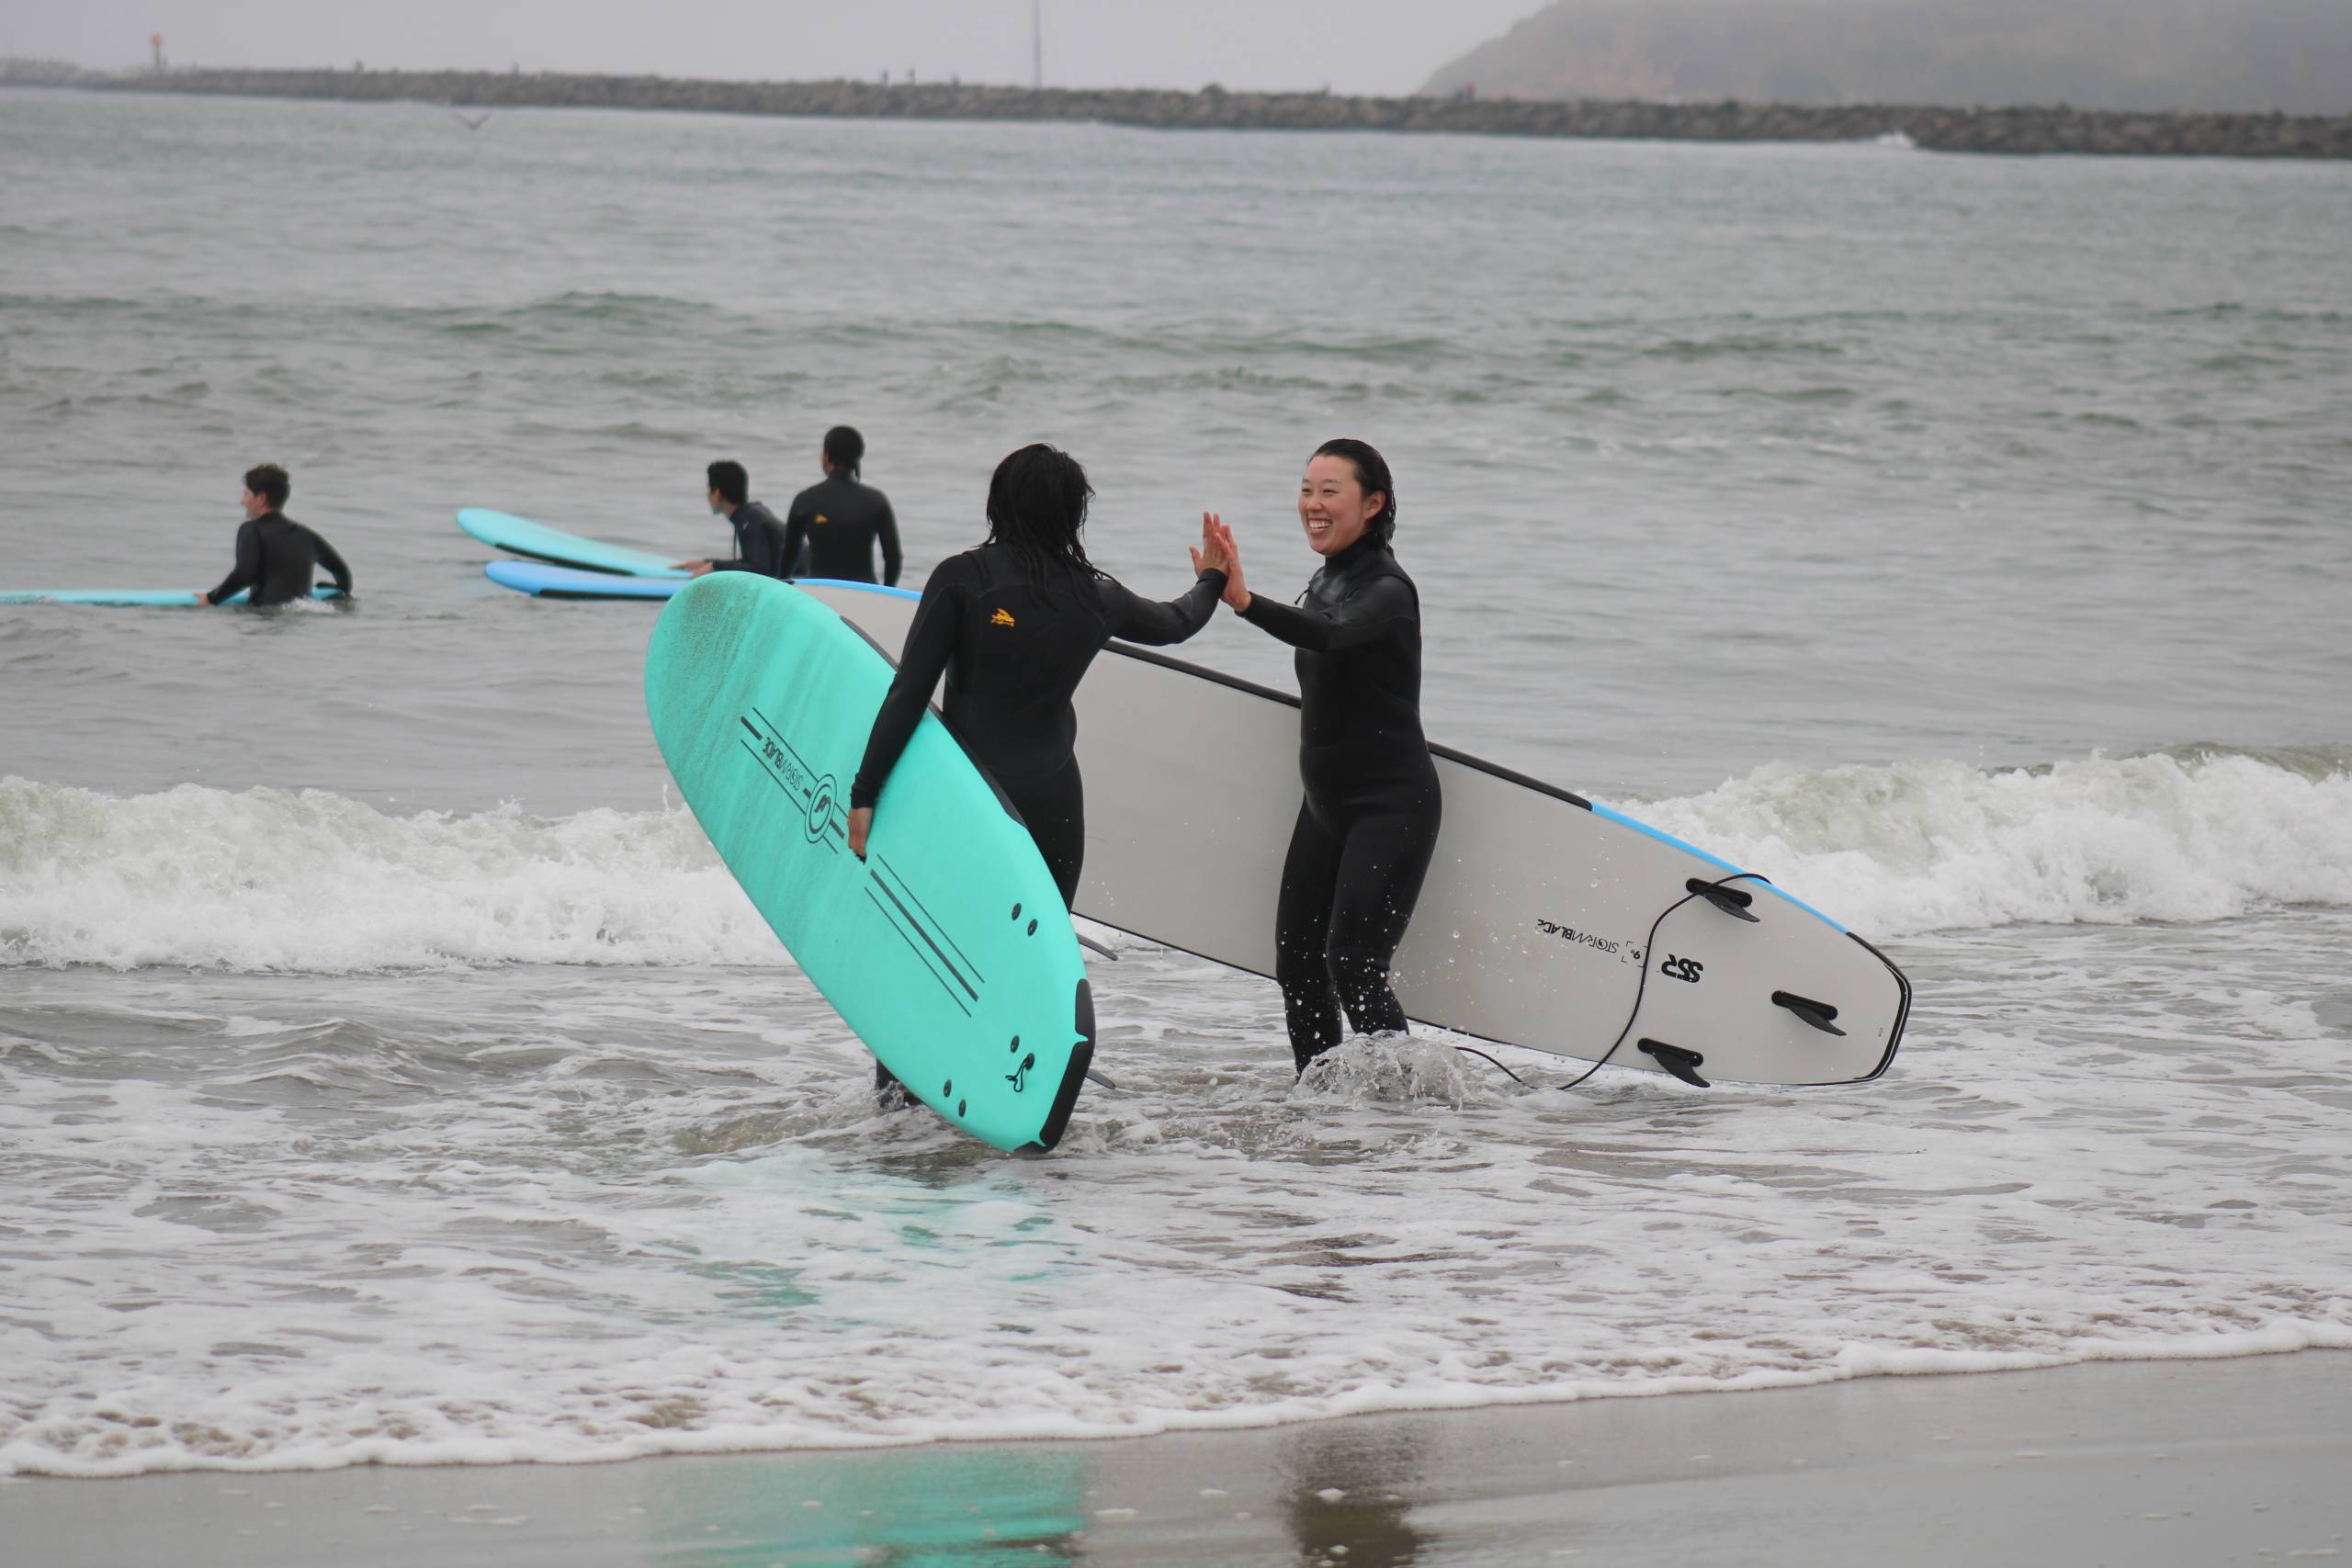 Two surfers high five in the water.